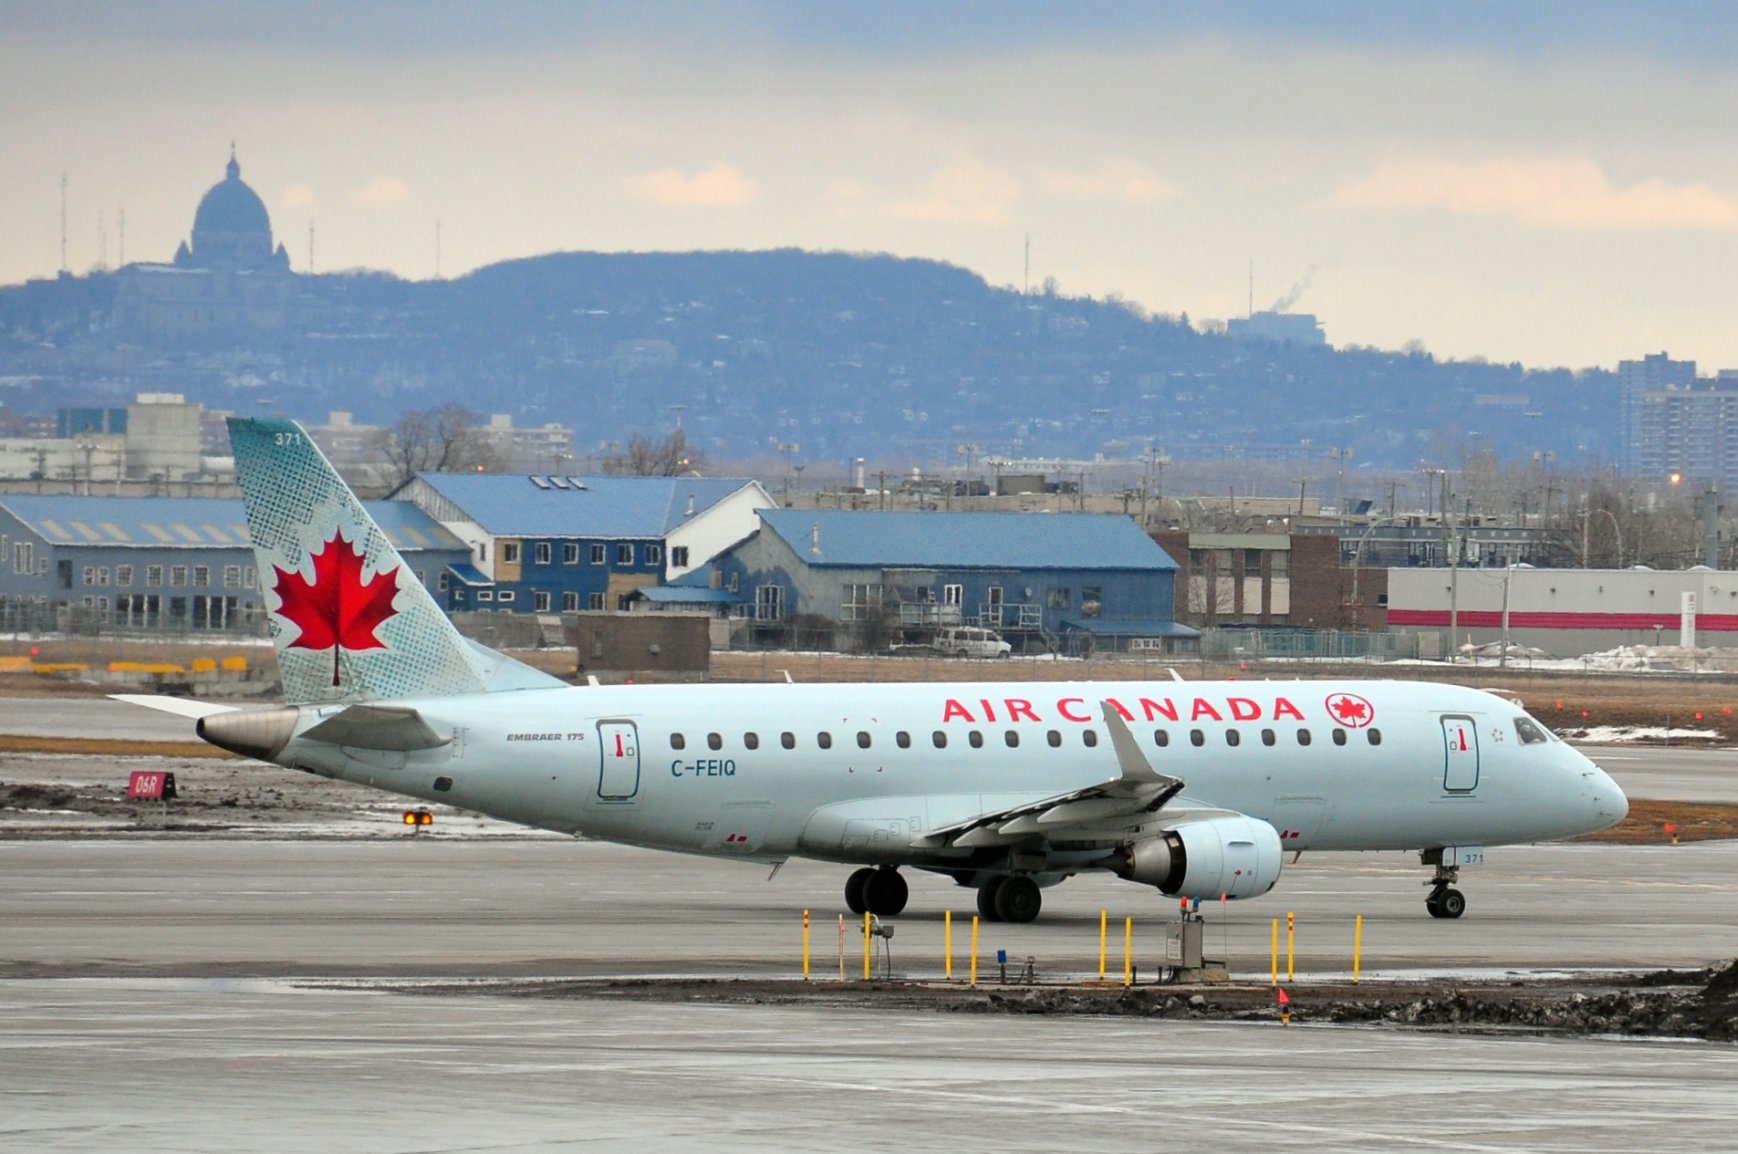 C-FEIQ Air Canada Embraer 175 par abdallahh sous (CC BY 2.0) https://www.flickr.com/photos/husseinabdallah/4485099817/ https://creativecommons.org/licenses/by/2.0/